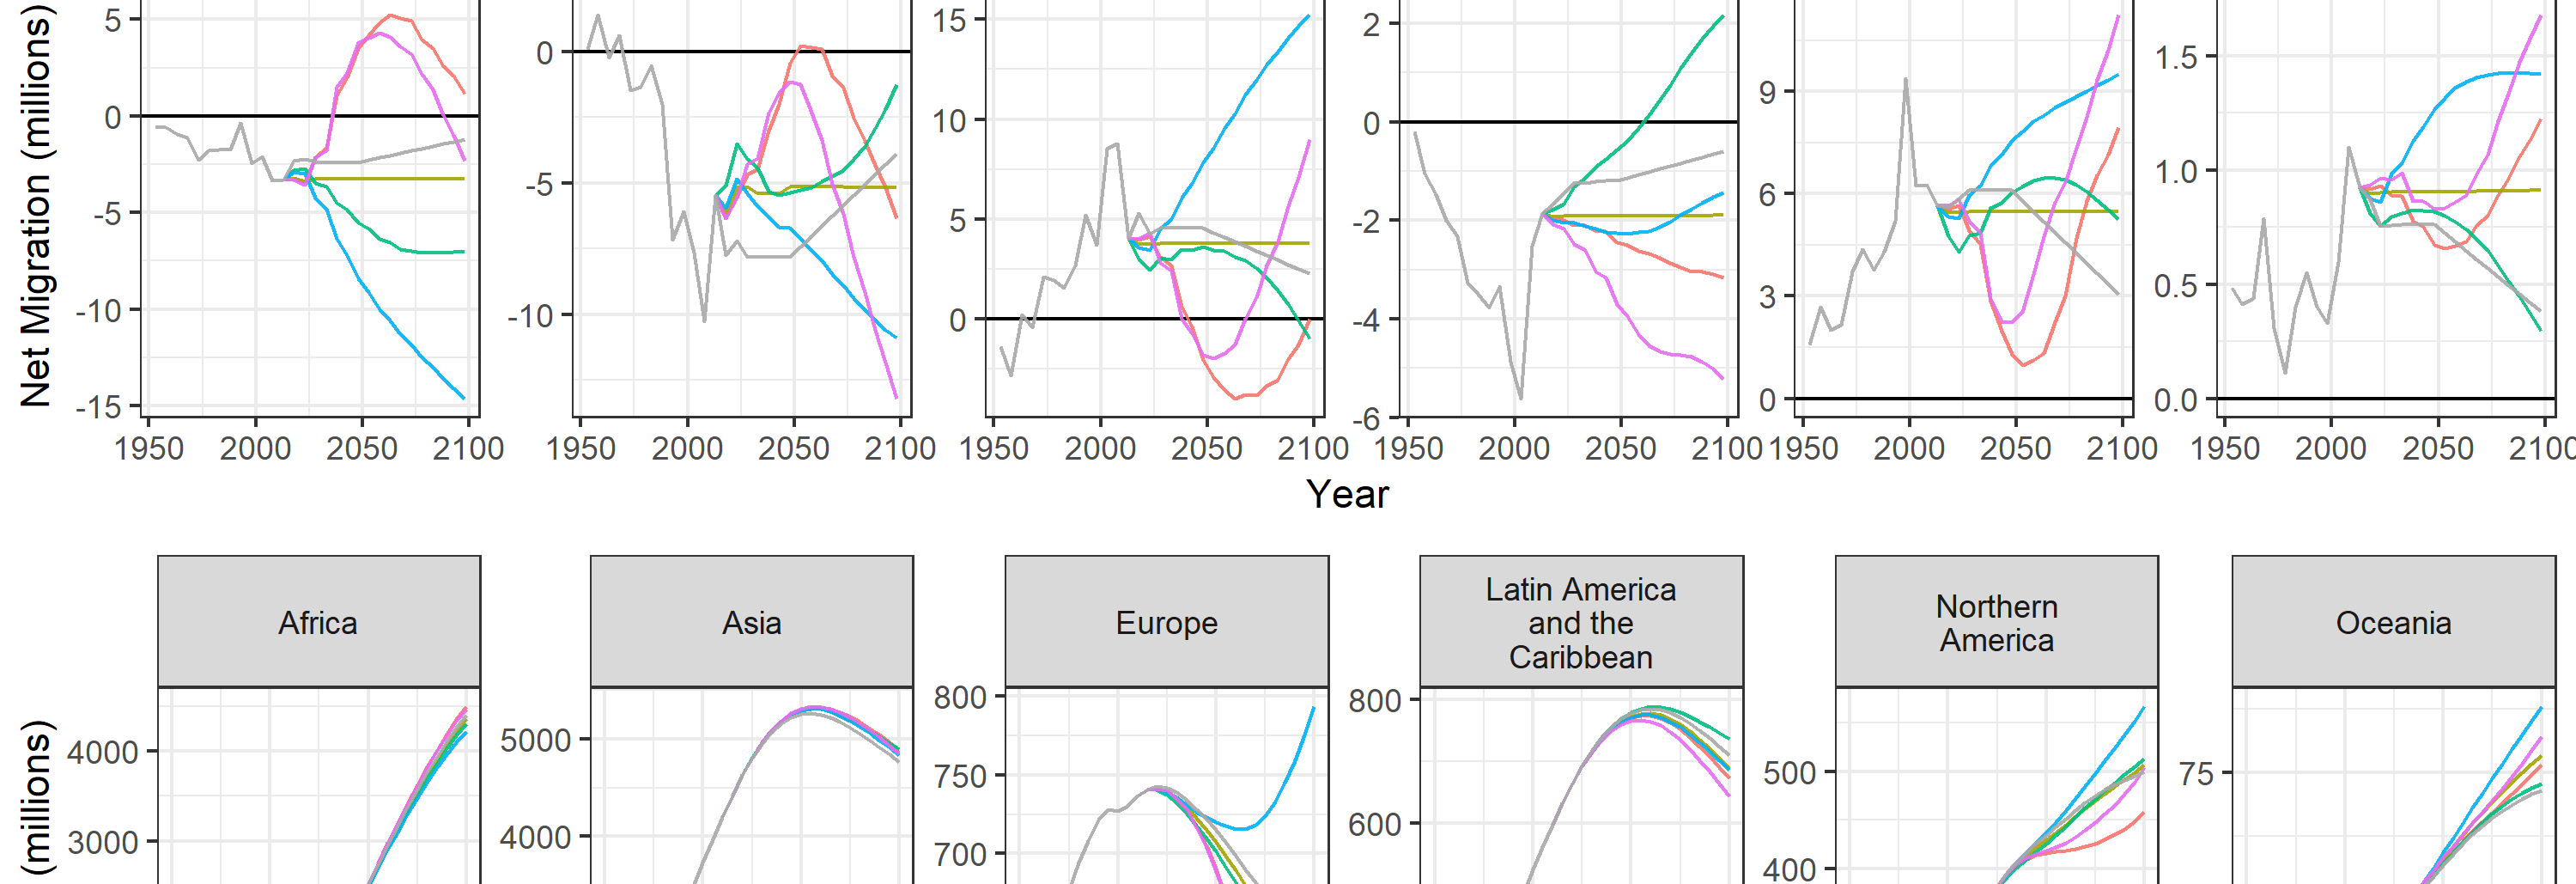 Non-zero trajectories for long-run net migration assumptions in global population projection models